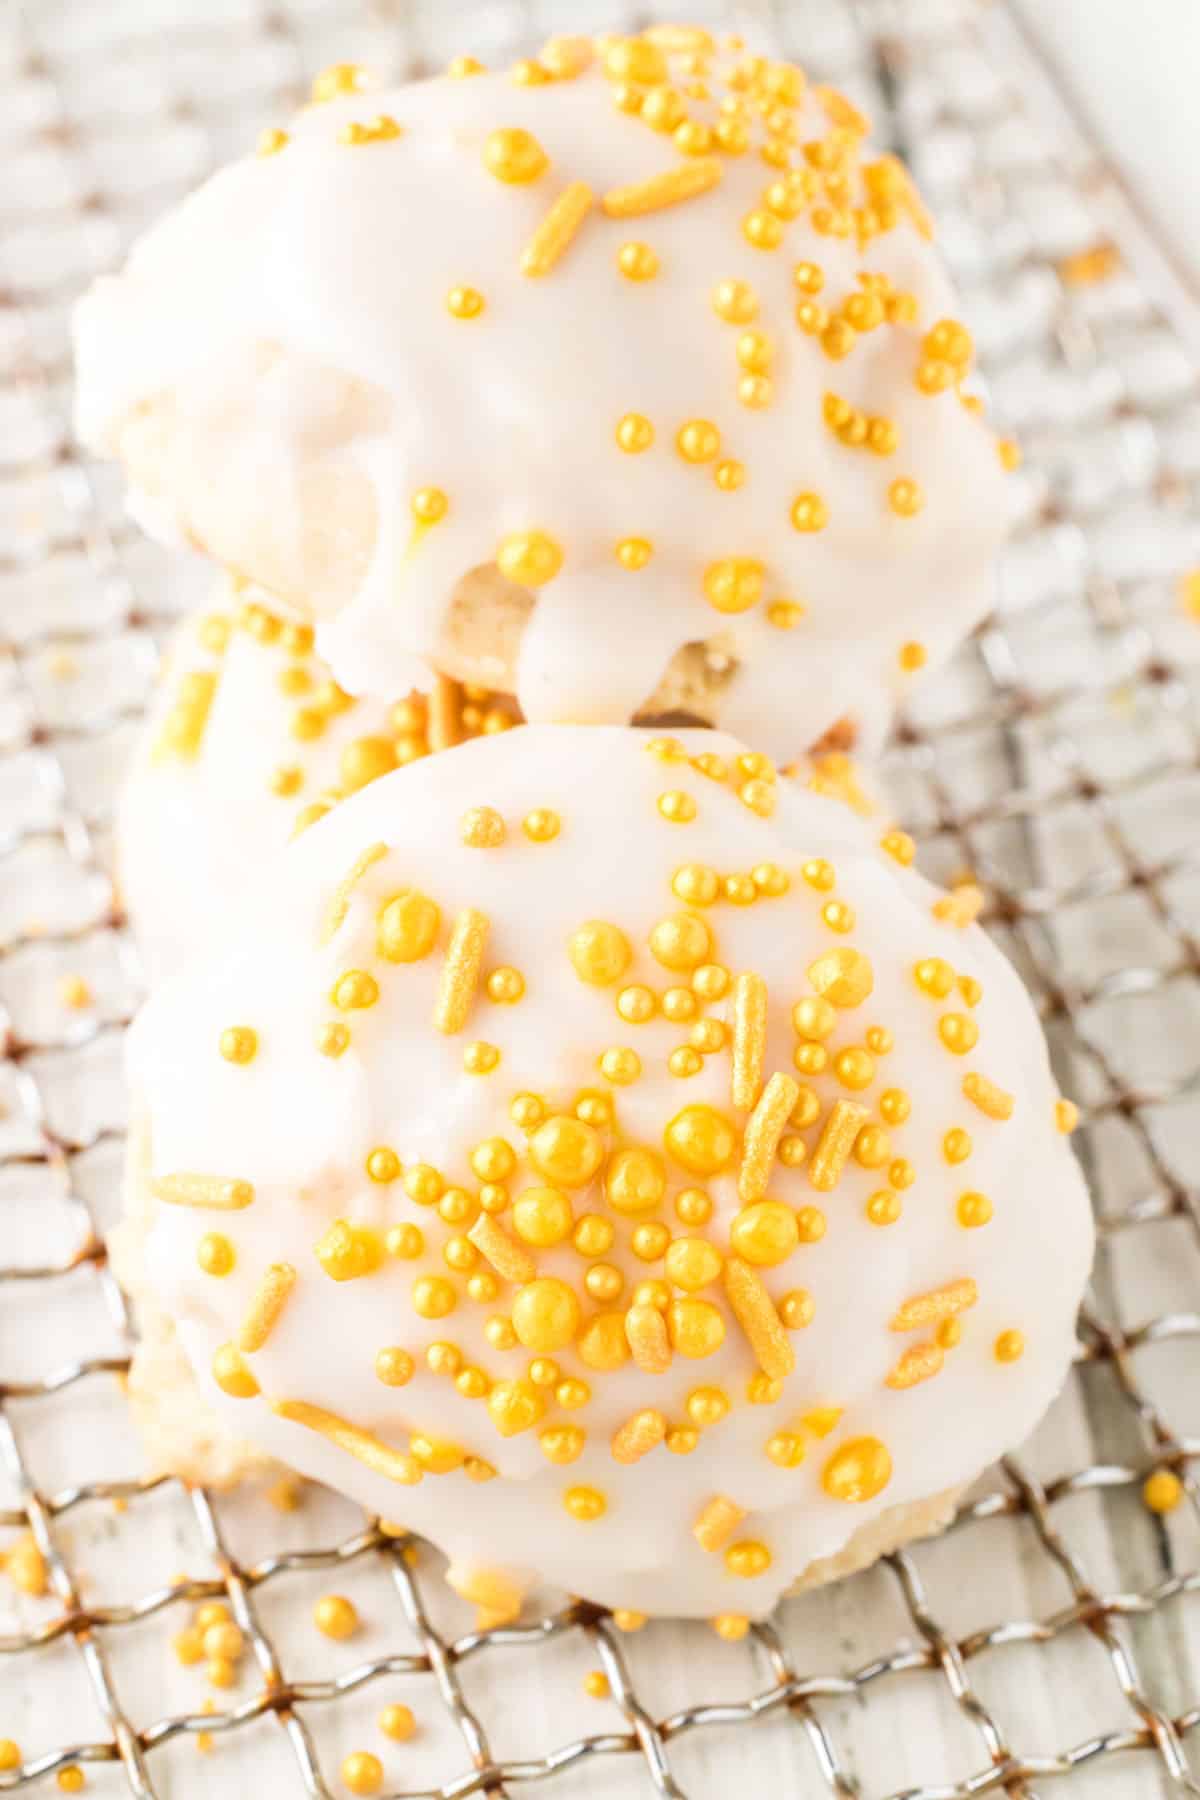 Ricatto cookies with yellow sprinkles on them.